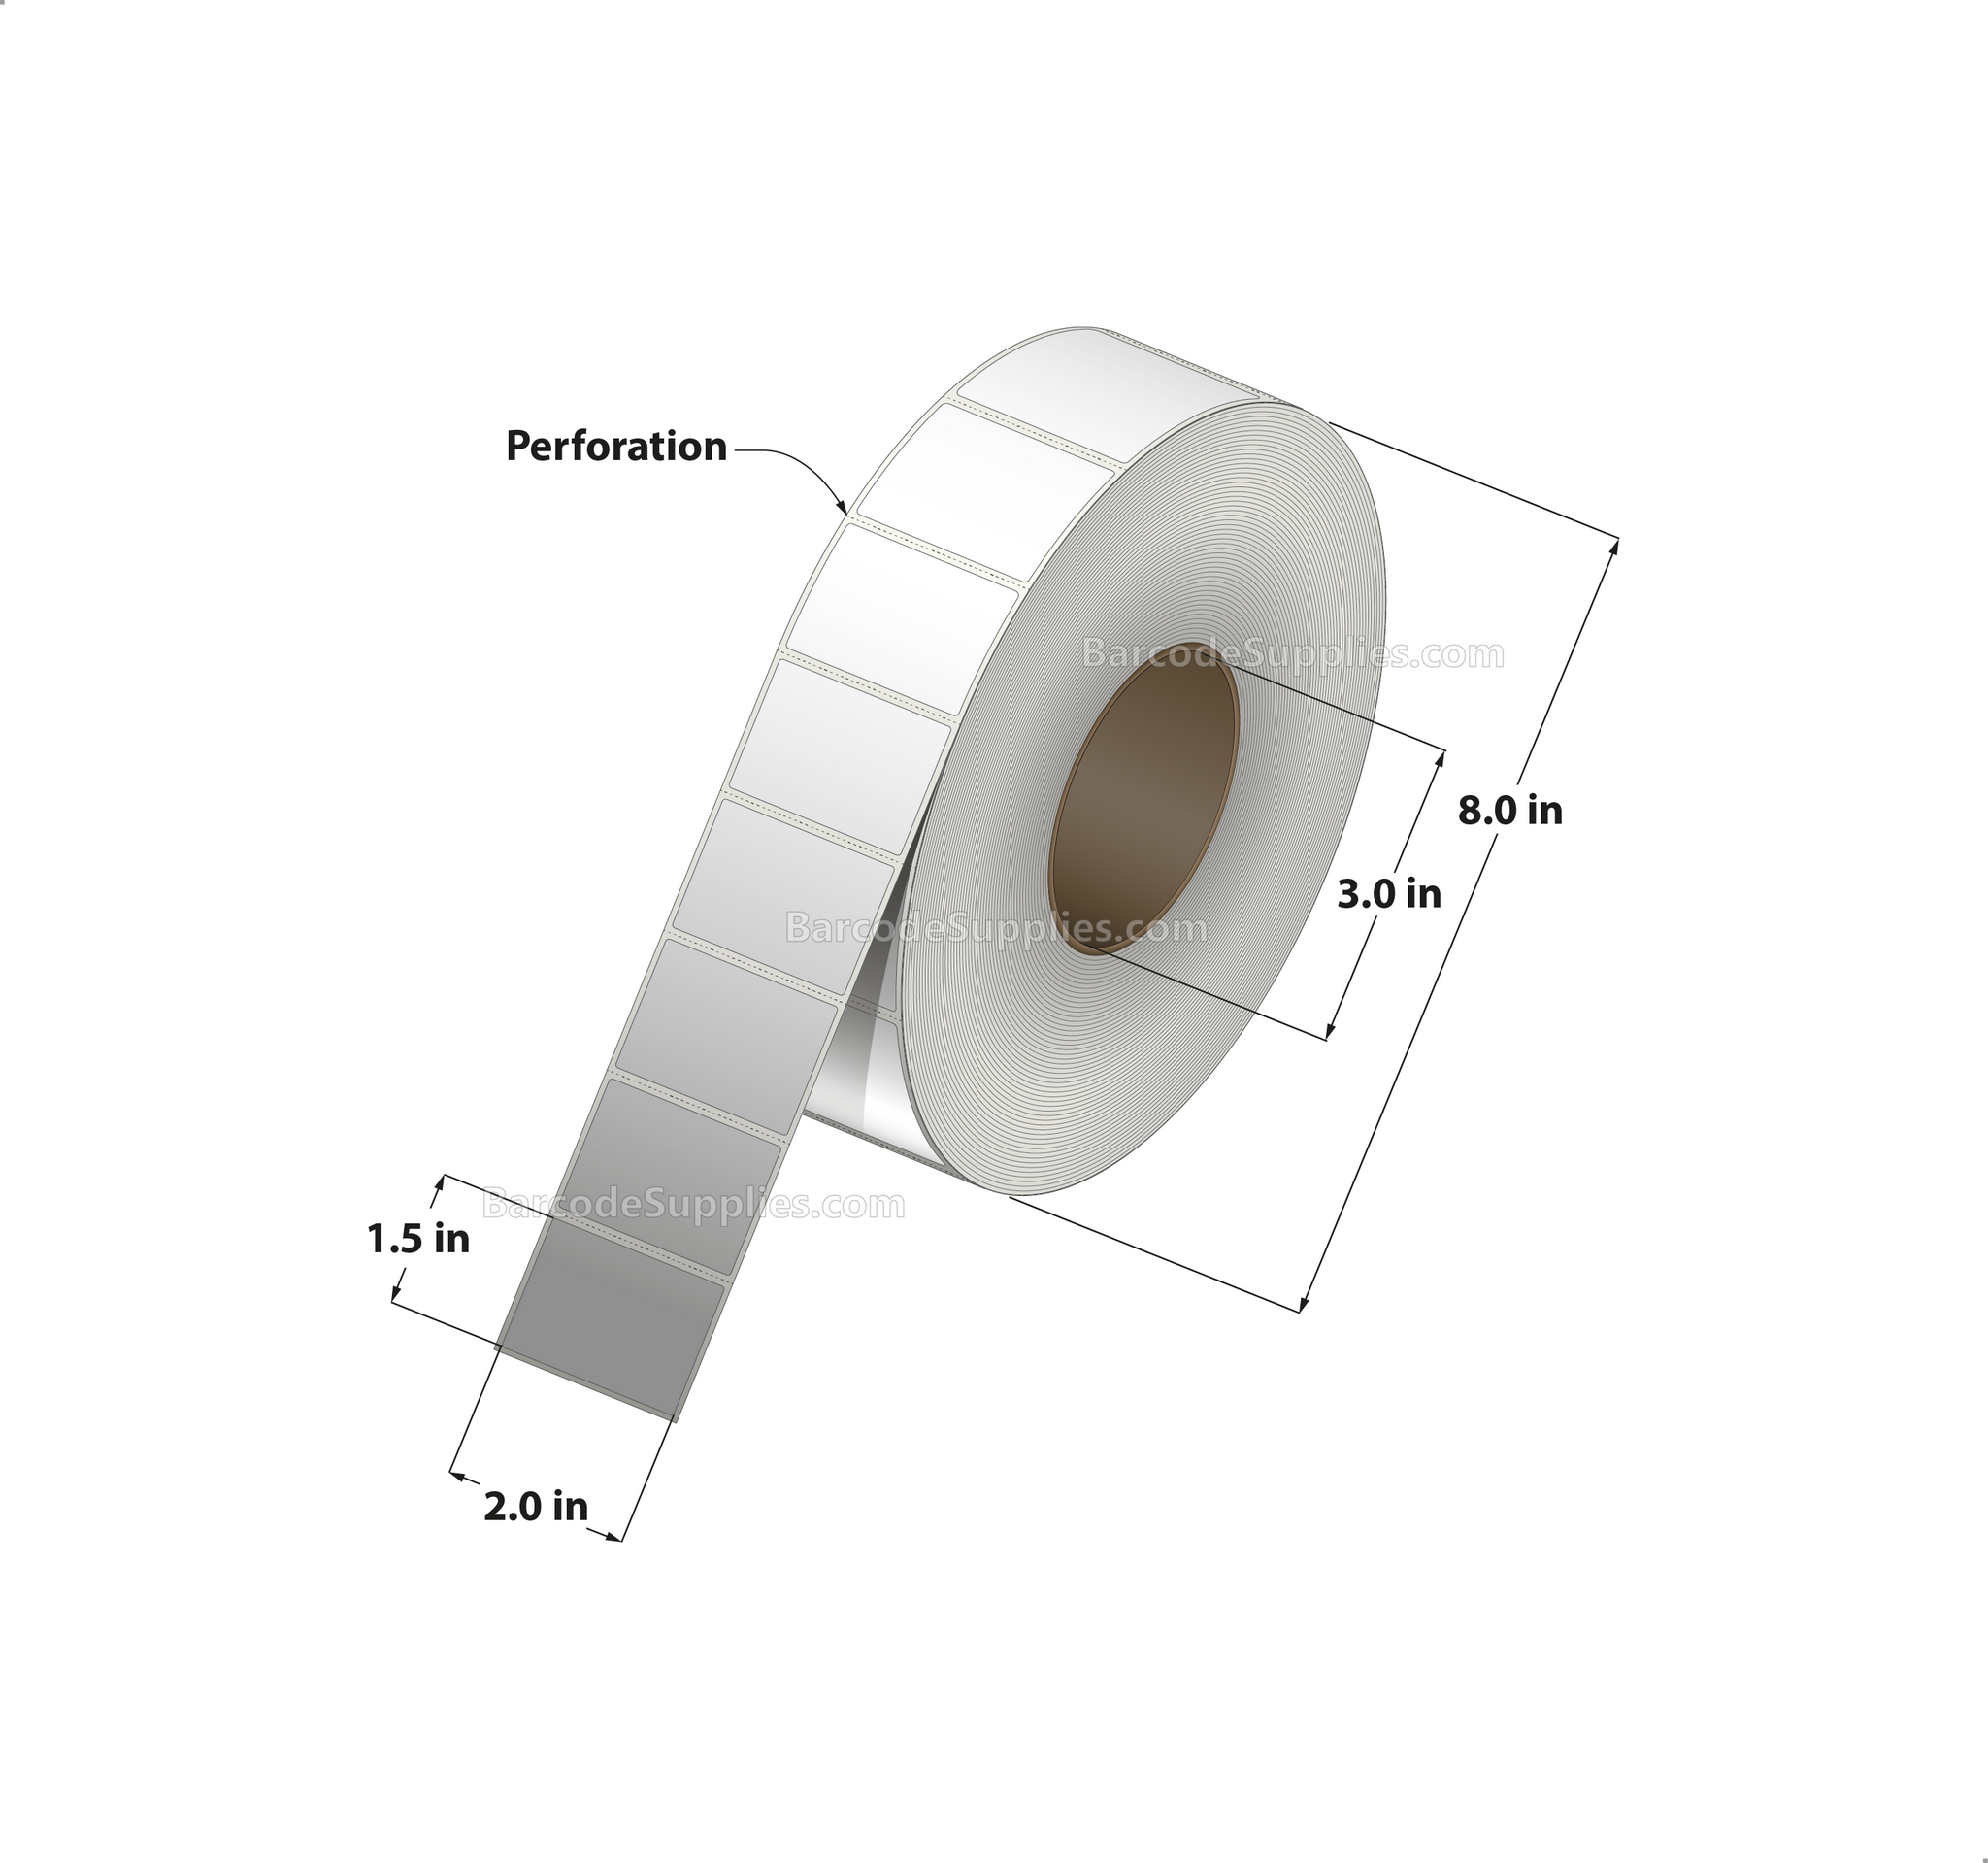 2 x 1.5 Thermal Transfer White Labels With Permanent Adhesive - Perforated - 3600 Labels Per Roll - Carton Of 8 Rolls - 28800 Labels Total - MPN: RT-2-15-3600-3